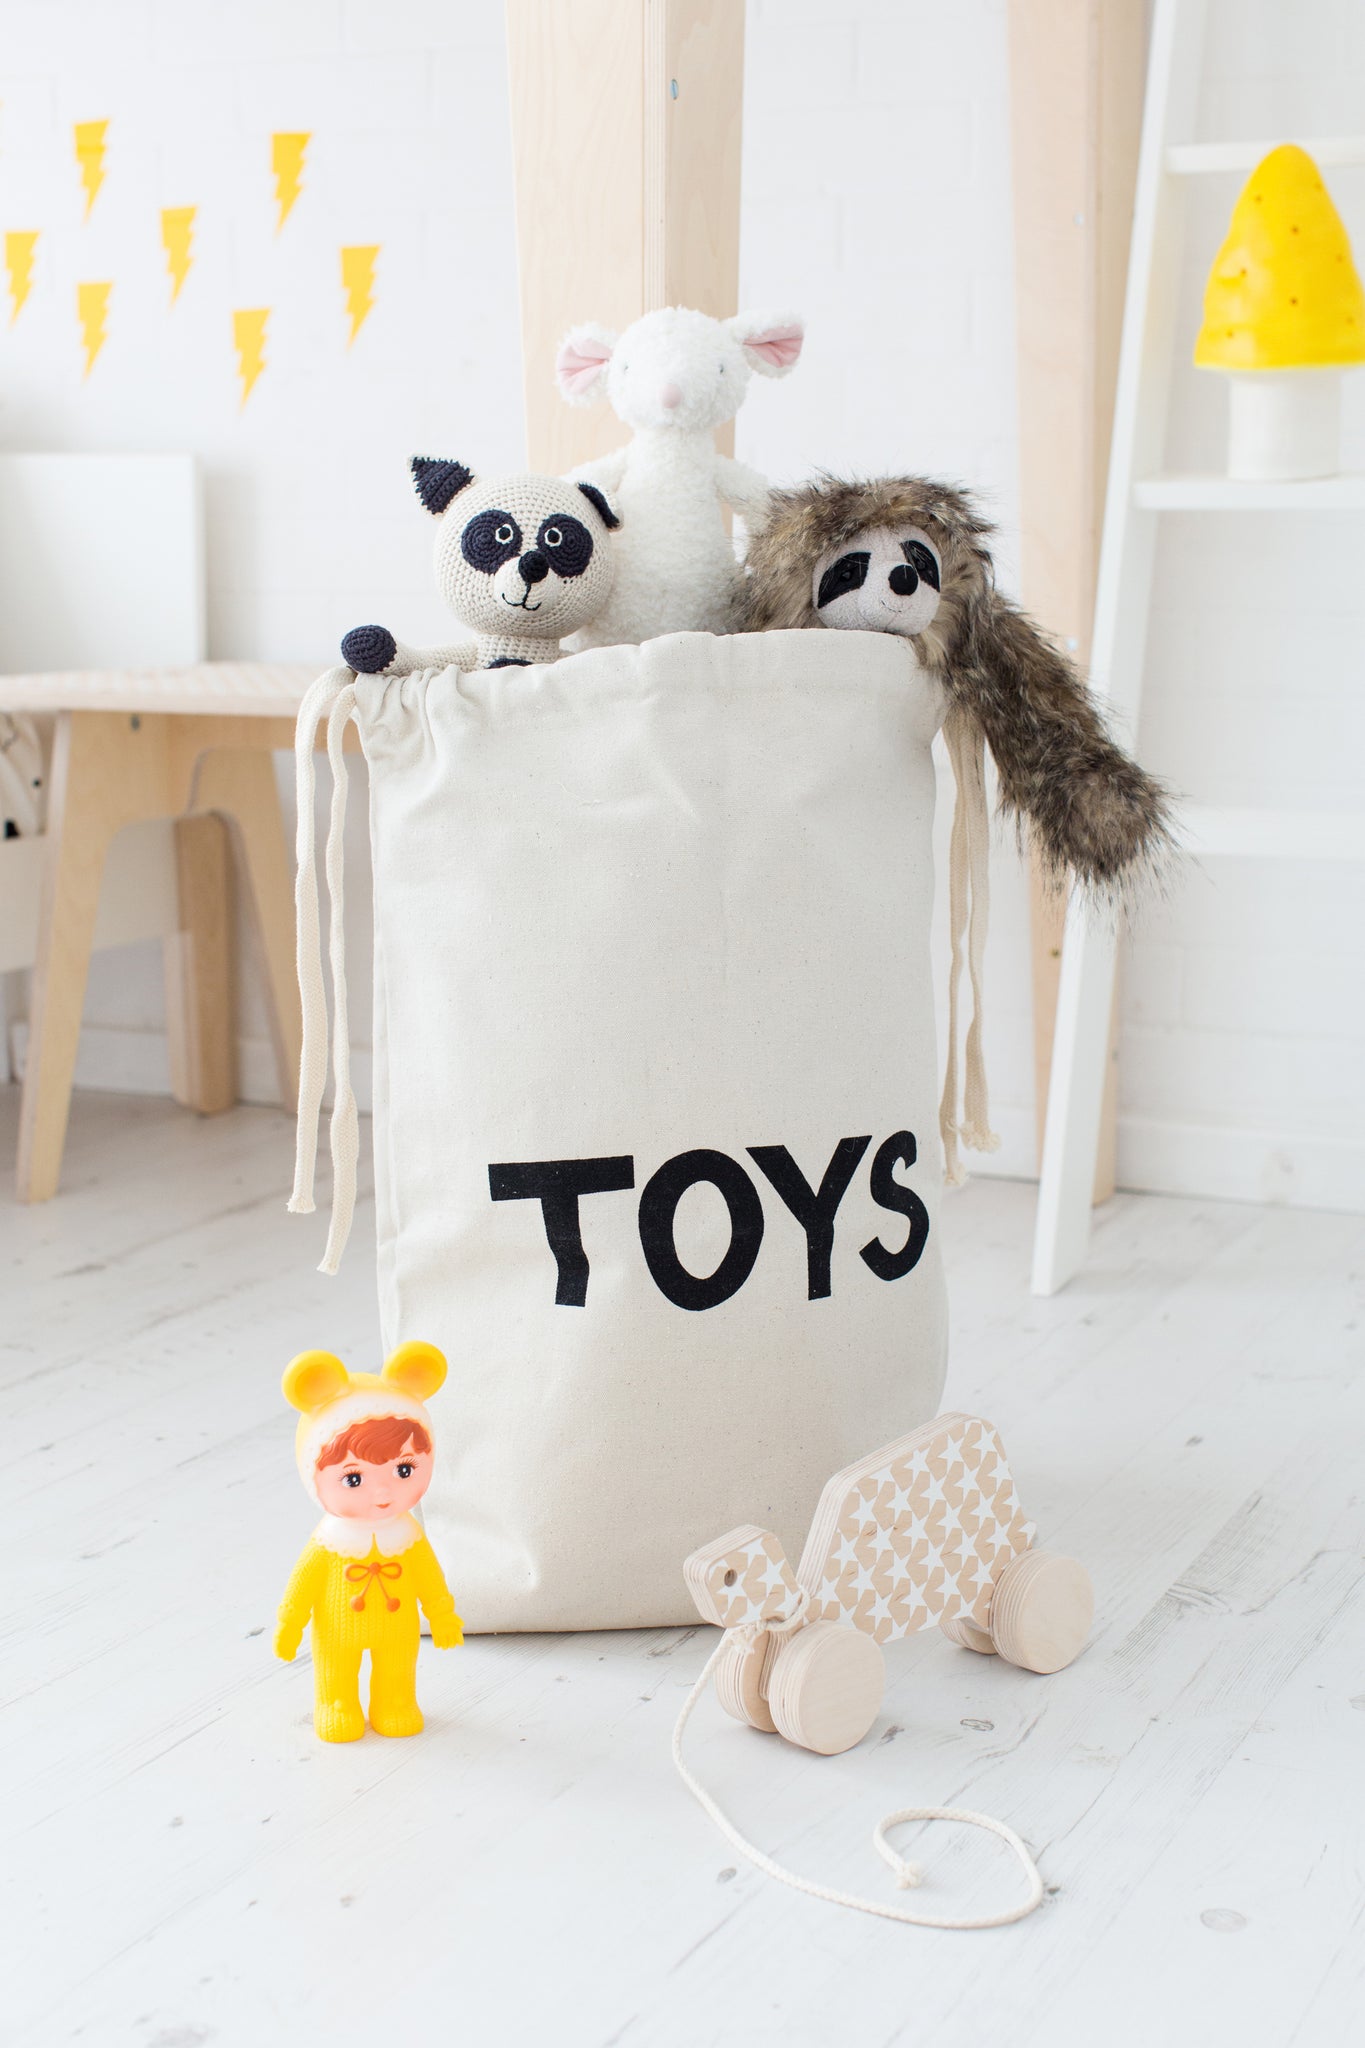 Toys Storage Bag by Tellkiddo, available at Bobby Rabbit.